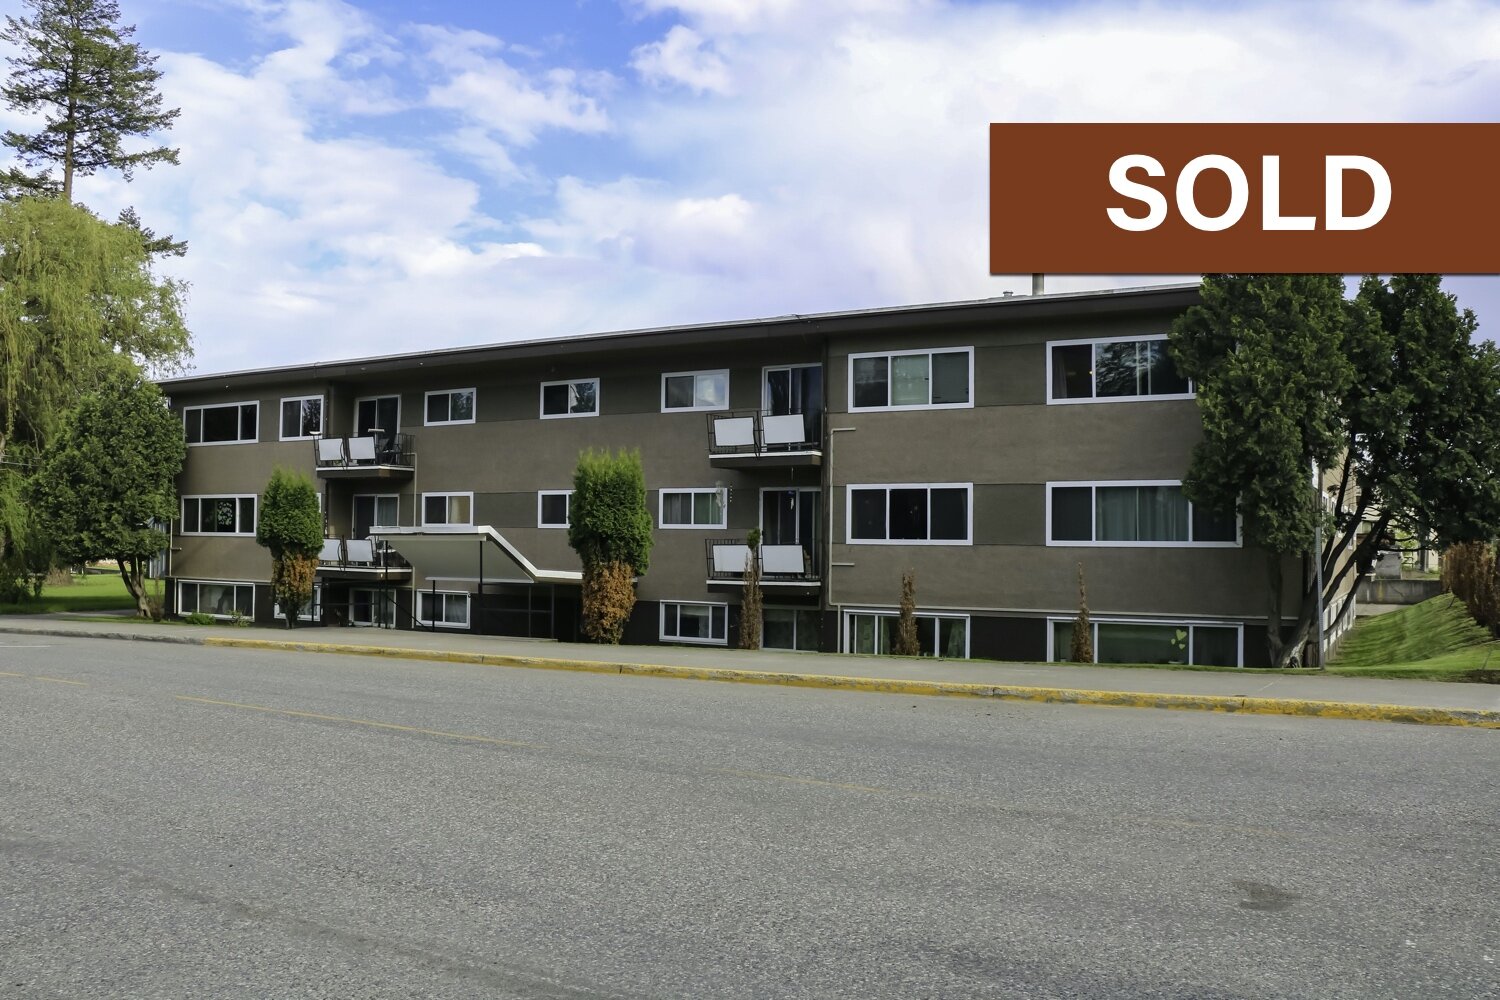 fircrest-apartments-110-bowron-ave-quesnel-exterior-front-apartment-building-SOLD.jpg